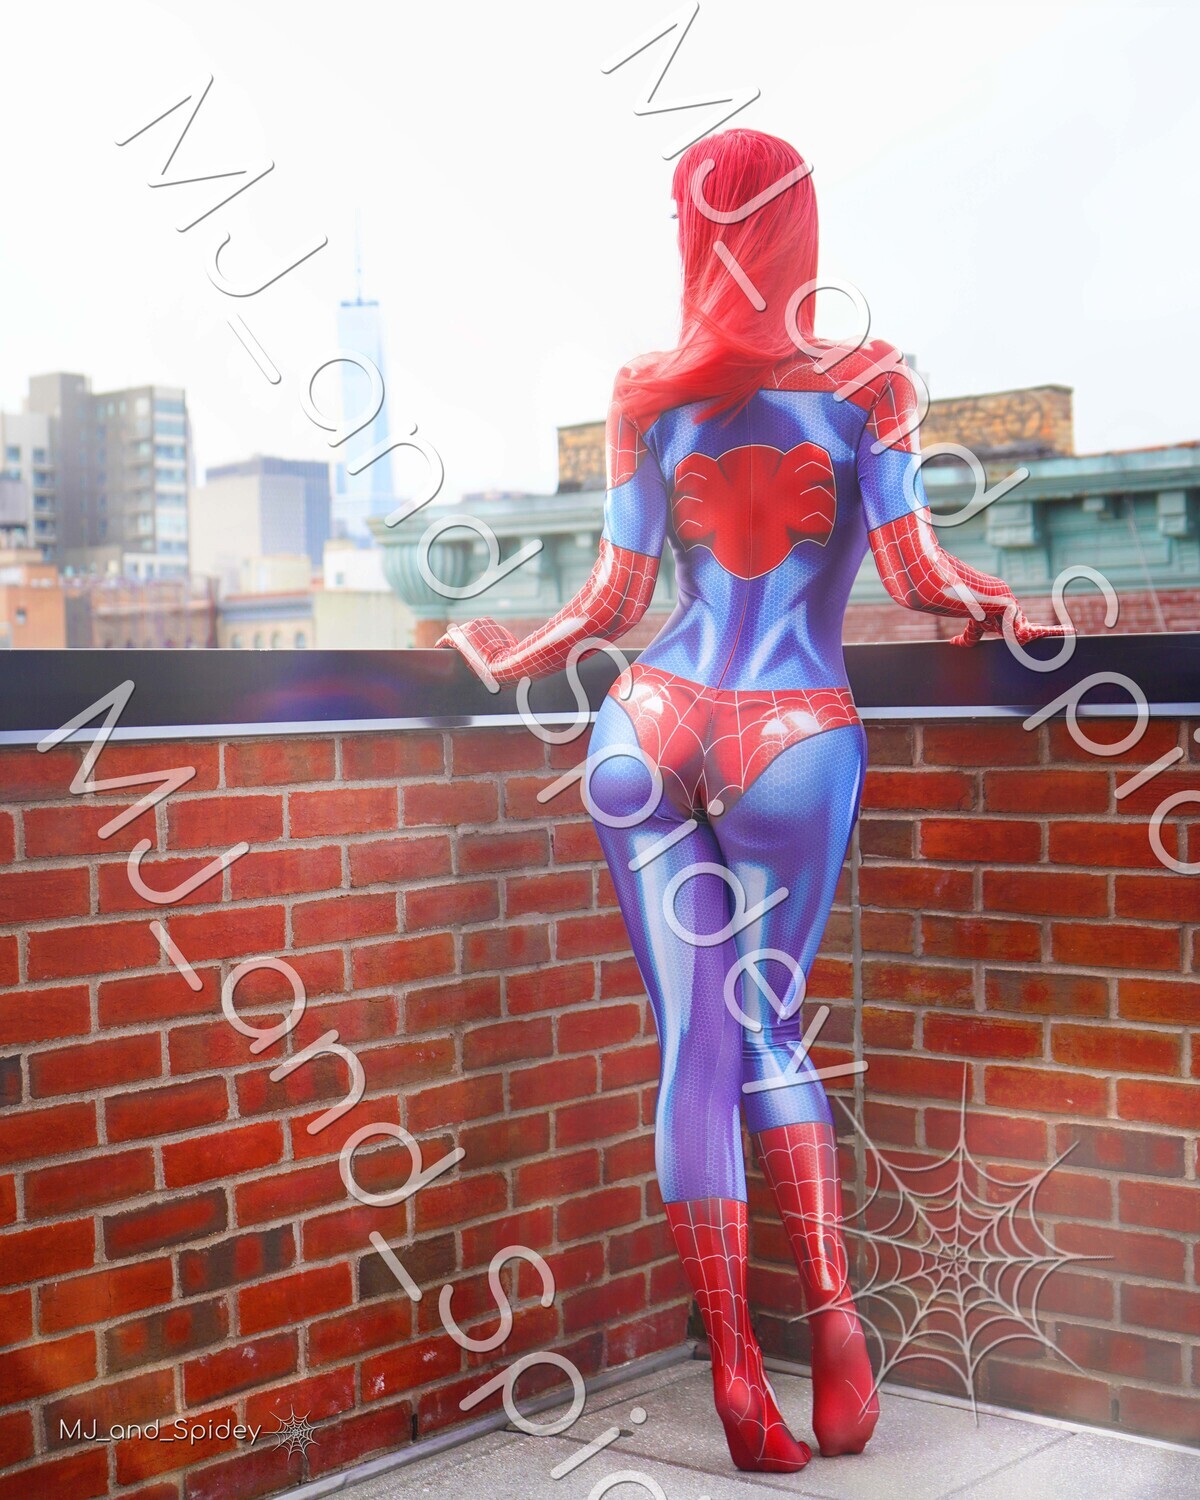 Marvel - Spider-Man - Mary Jane Watson - Classic Spider-Suit - NYC 3 -  Cosplay Print (@MJ_and_Spidey, MJ and Spidey, Comics)